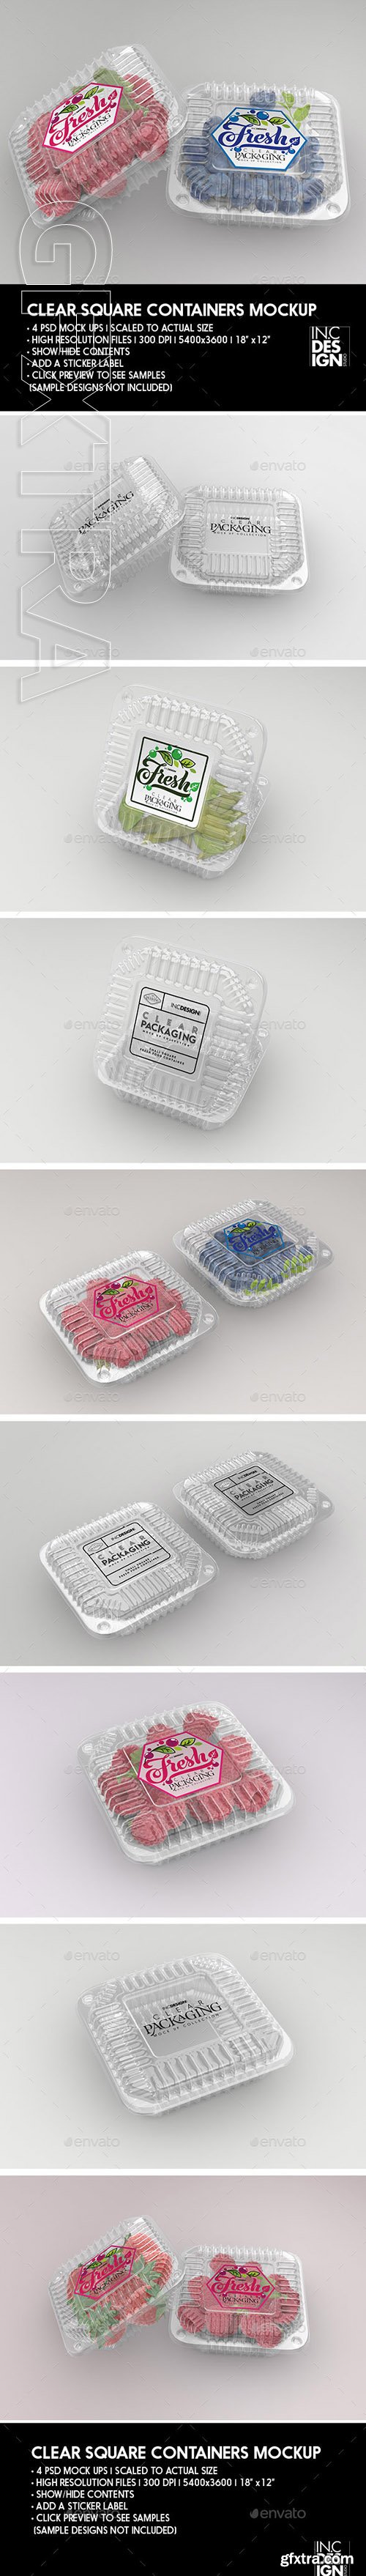 GR - Clear Square Clamshell Food Container Packaging Mockup 22066960